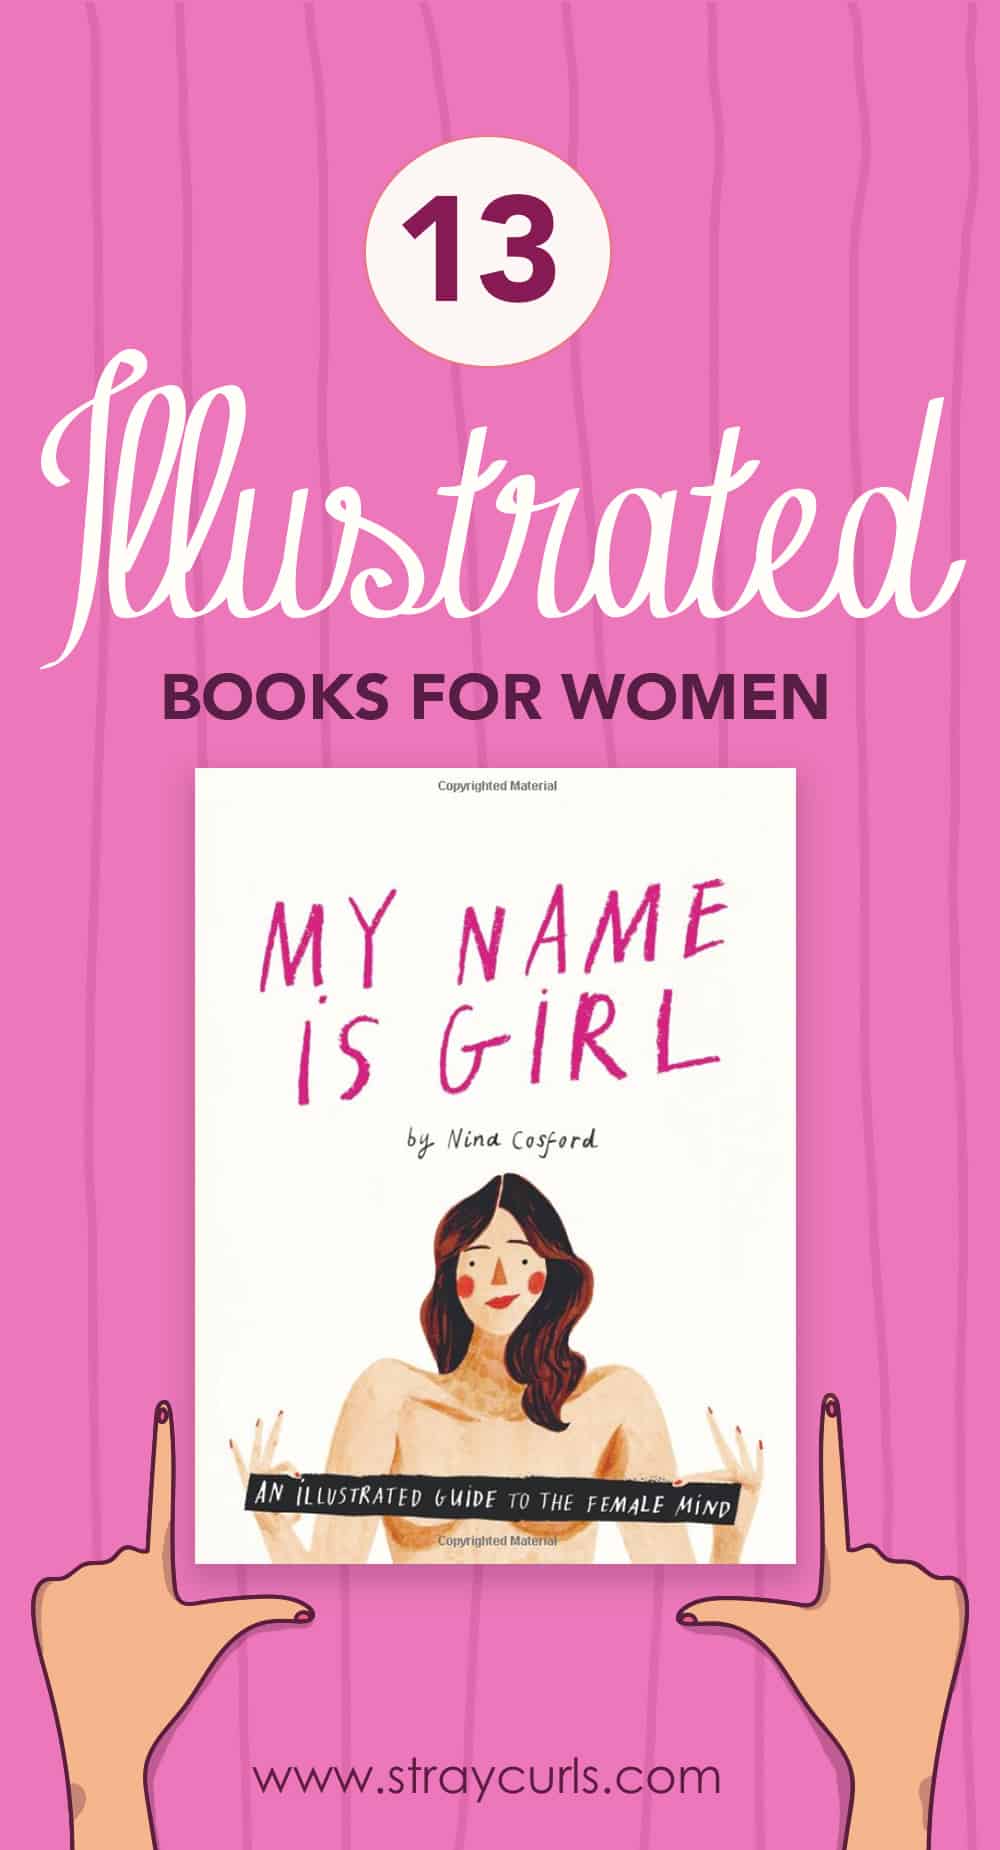 13 Beautiful Illustrated Books that every woman should read! These illustrated books are for women in their 20s or in business and they’re all about women empowerment. Buy these books online. These are the perfect gifts for book lovers! #book #girlboss #christmas #christmasgifts #lifestyle #millennial